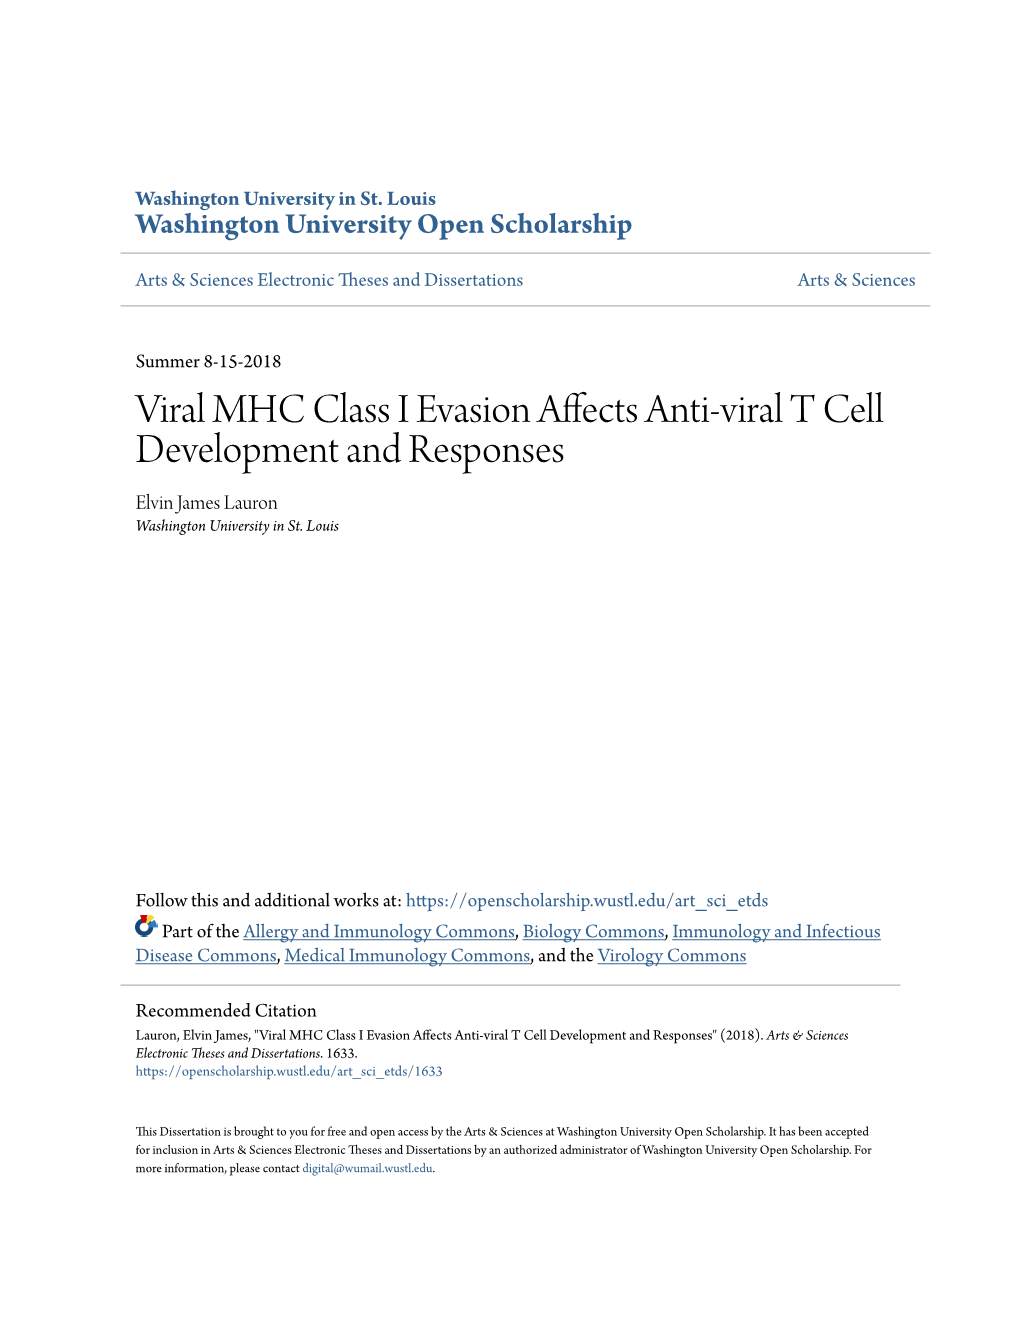 Viral MHC Class I Evasion Affects Anti-Viral T Cell Development and Responses Elvin James Lauron Washington University in St